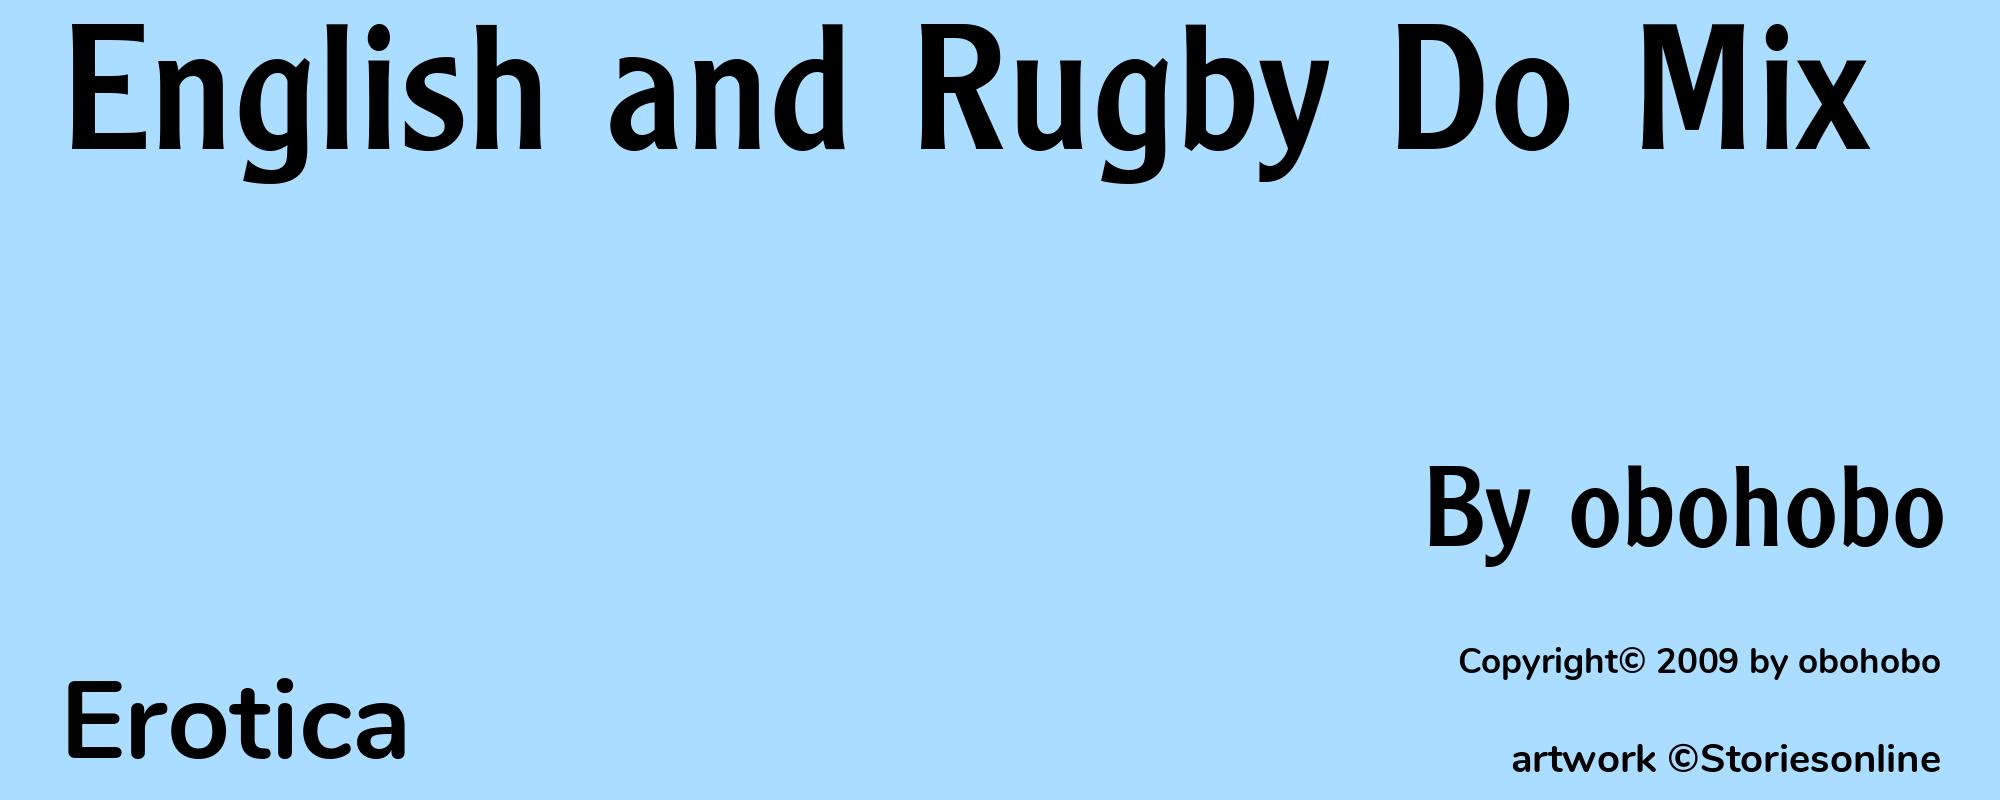 English and Rugby Do Mix - Cover